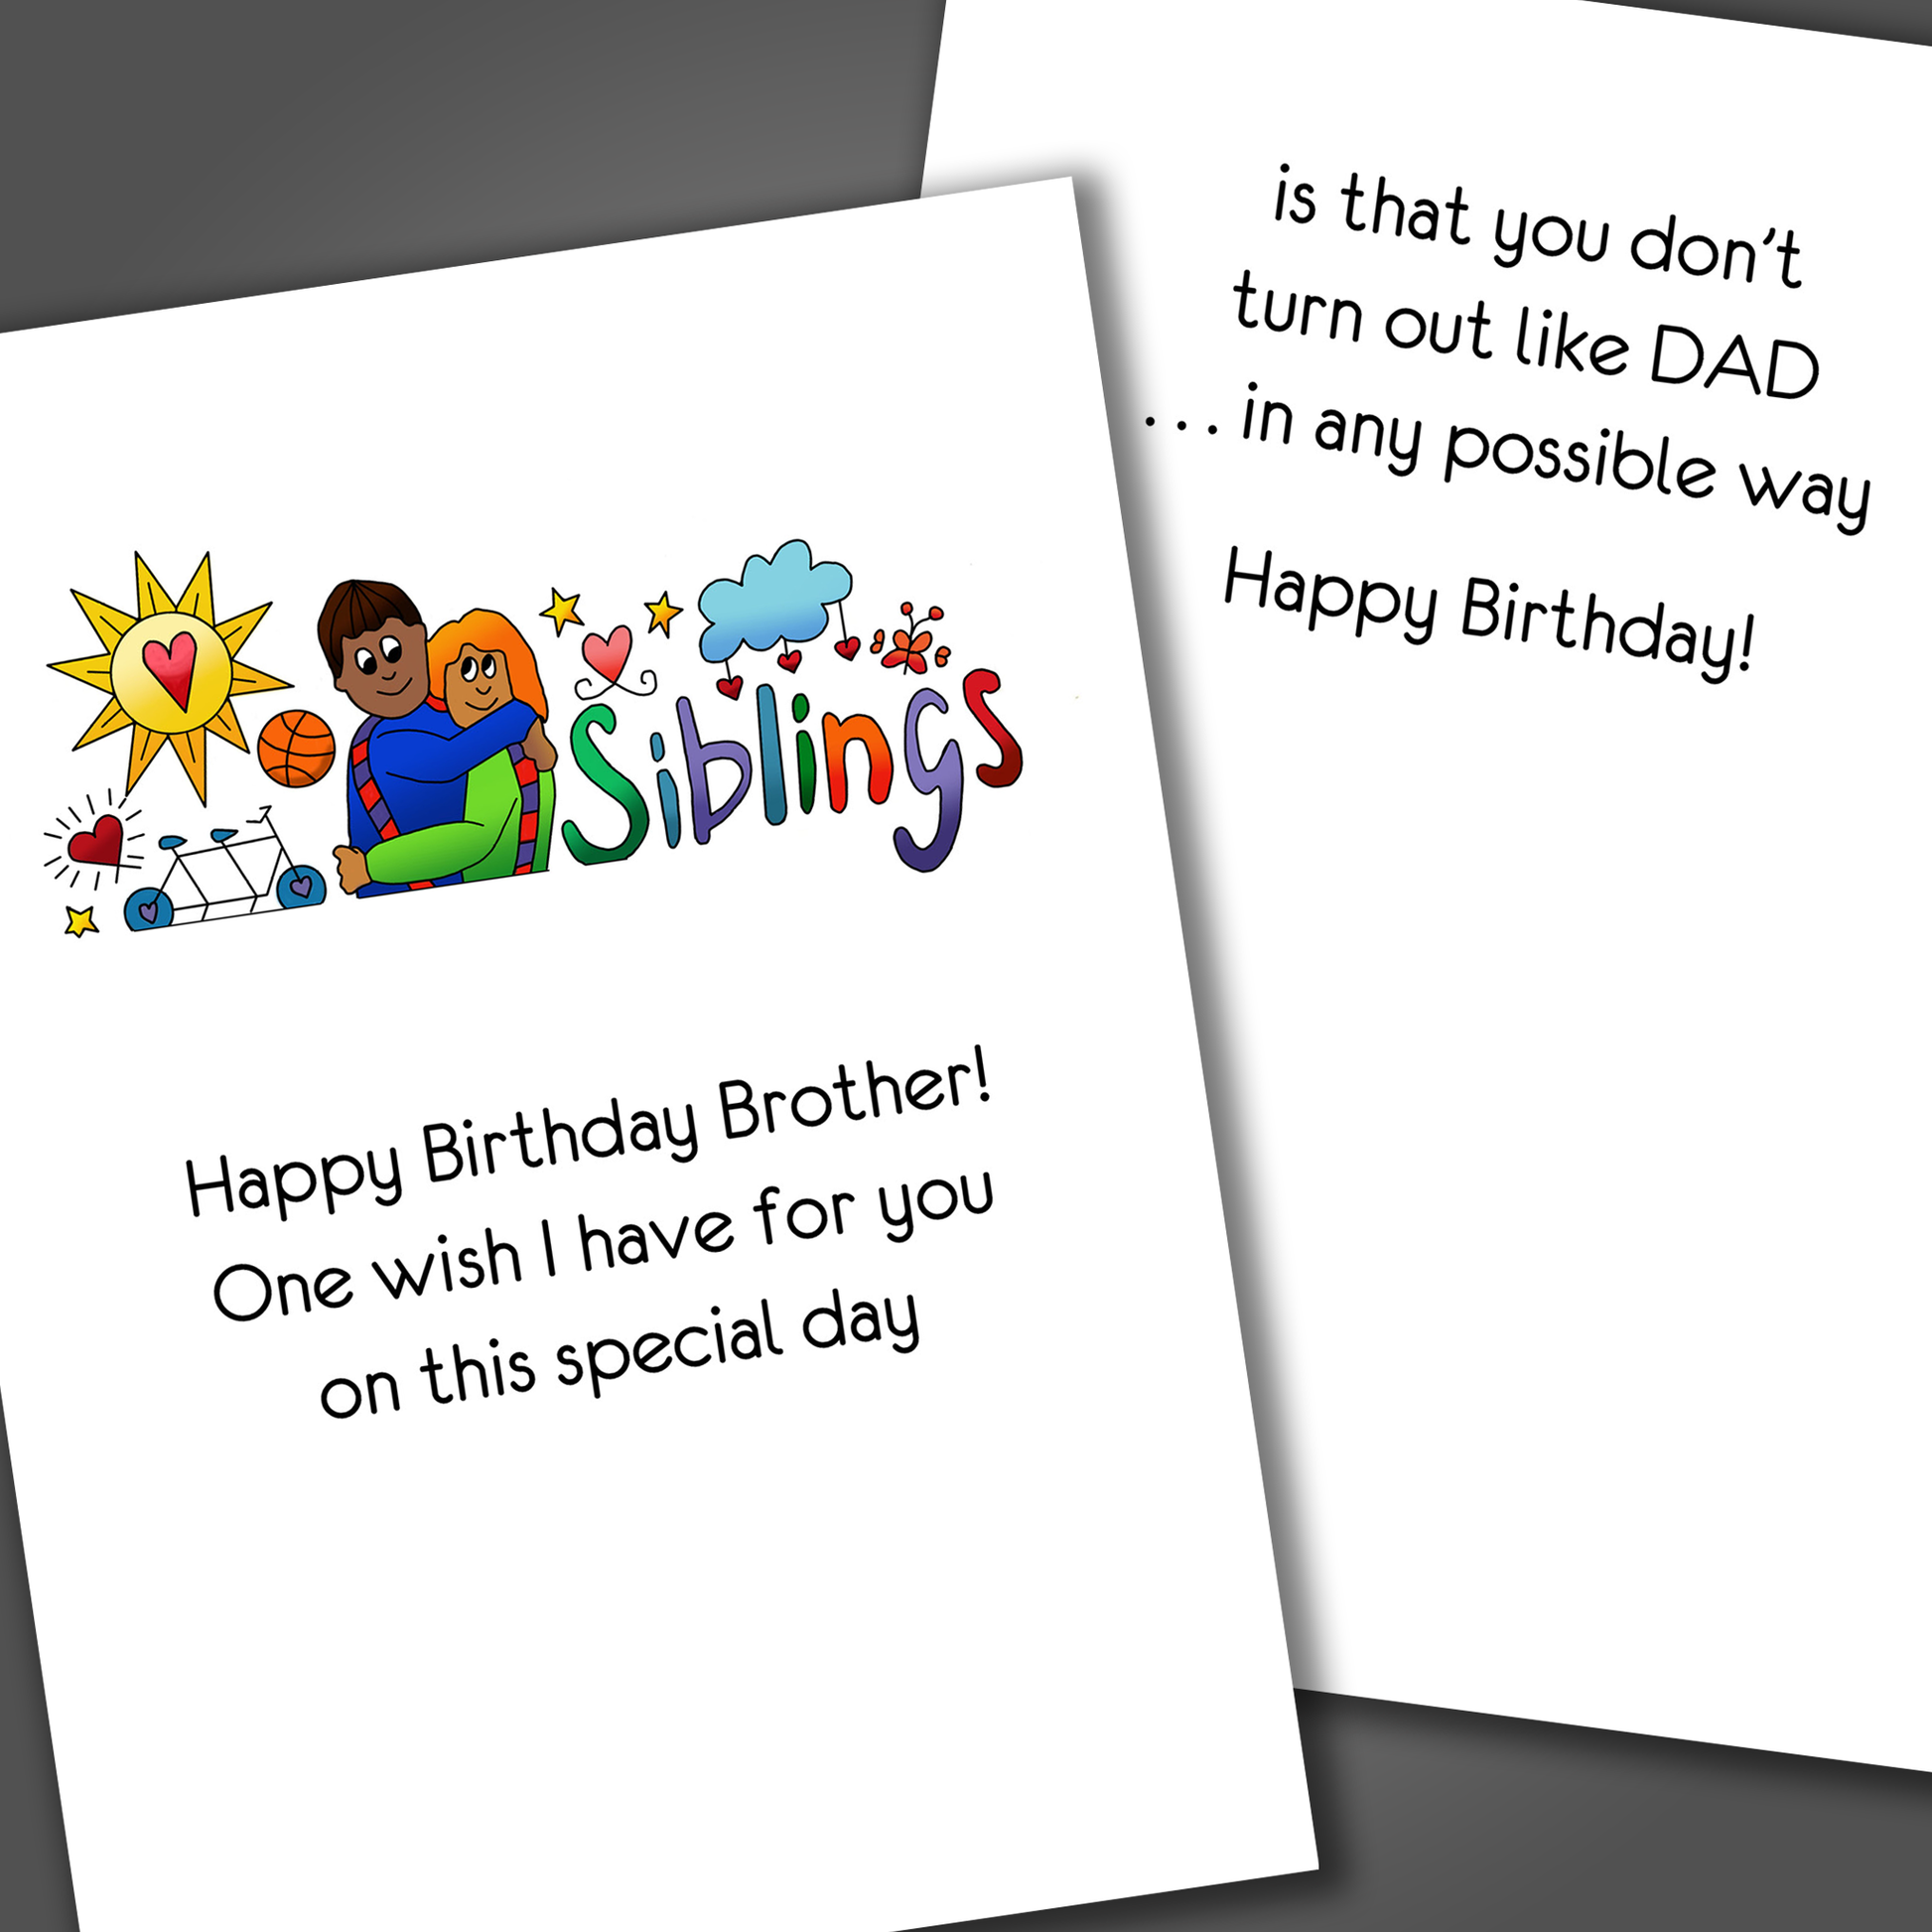 Funny birthday card for a brother with two siblings hugging drawn on the front. Inside the card is a funny joke that says I hope you don't turn out like dad!